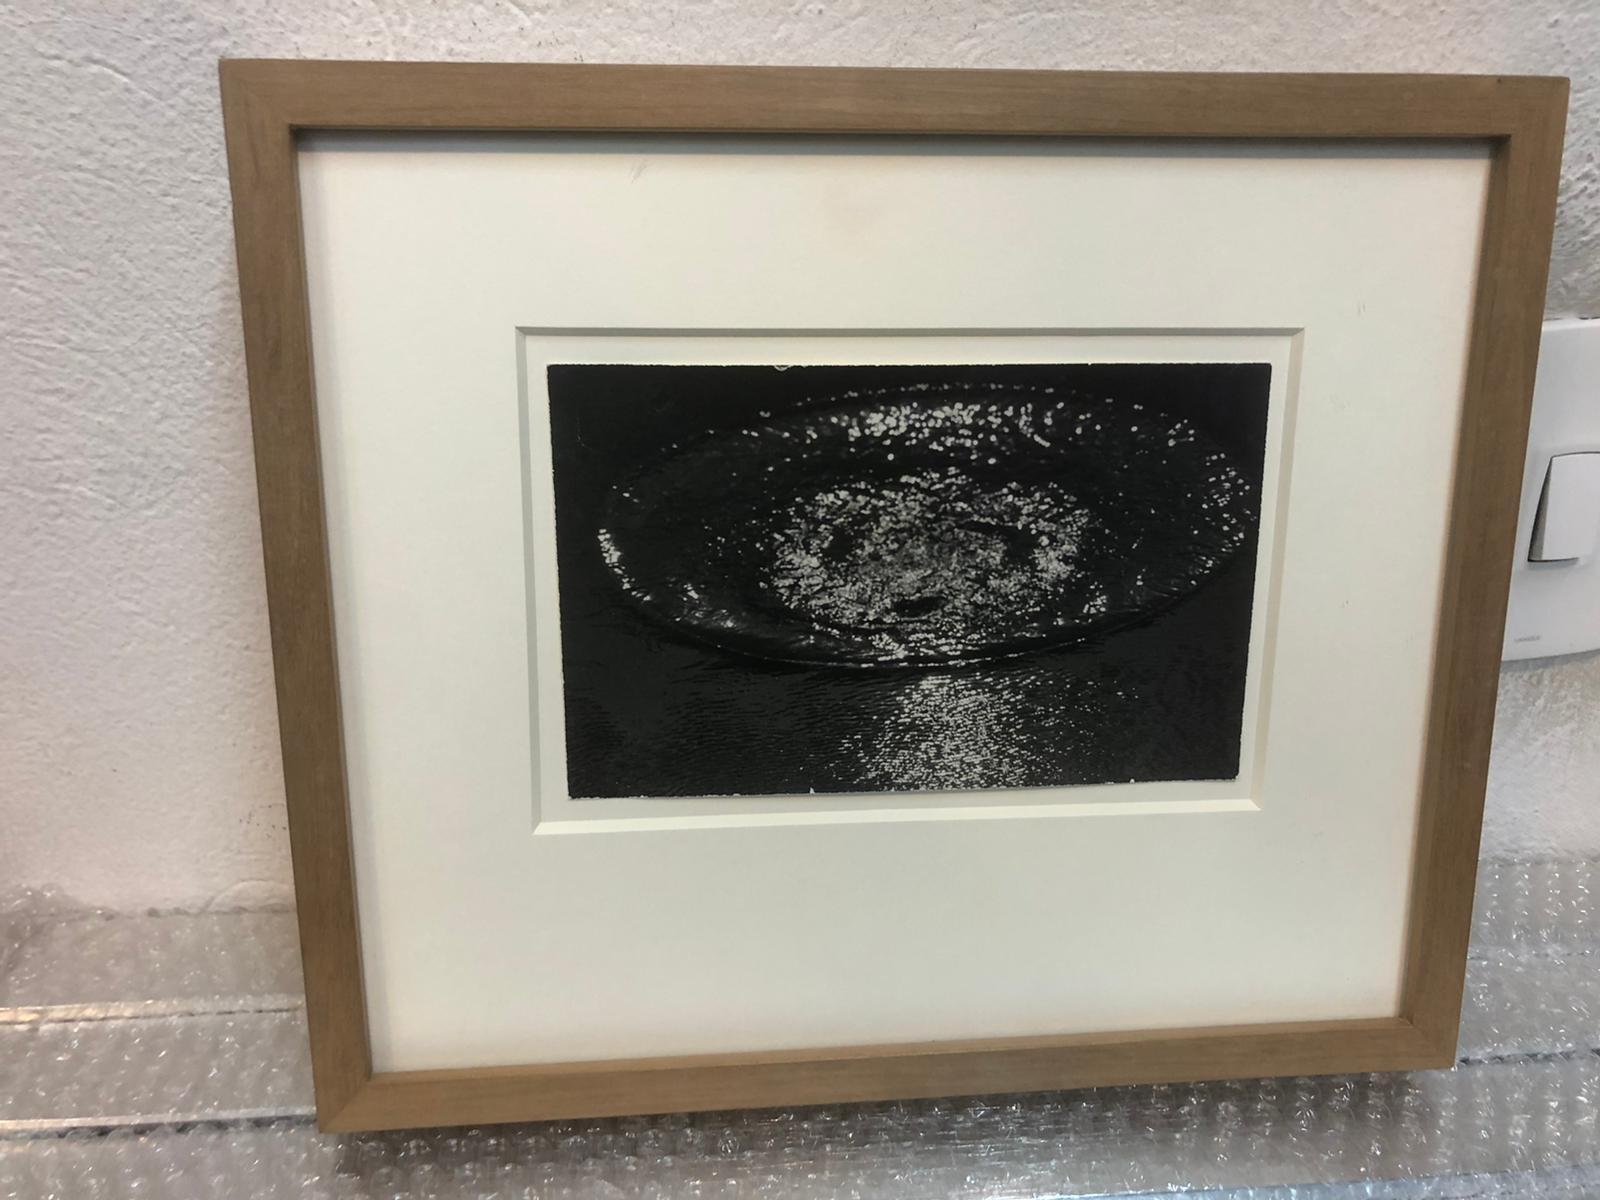 Gota de Agua by Leo Matiz
Image size: 4 in. H x 7.5 in. W
Frame size: 11.5 in. H x 13.5 in. W
One of a Kind

Wood Frame 

All photographs are accompanied by a  